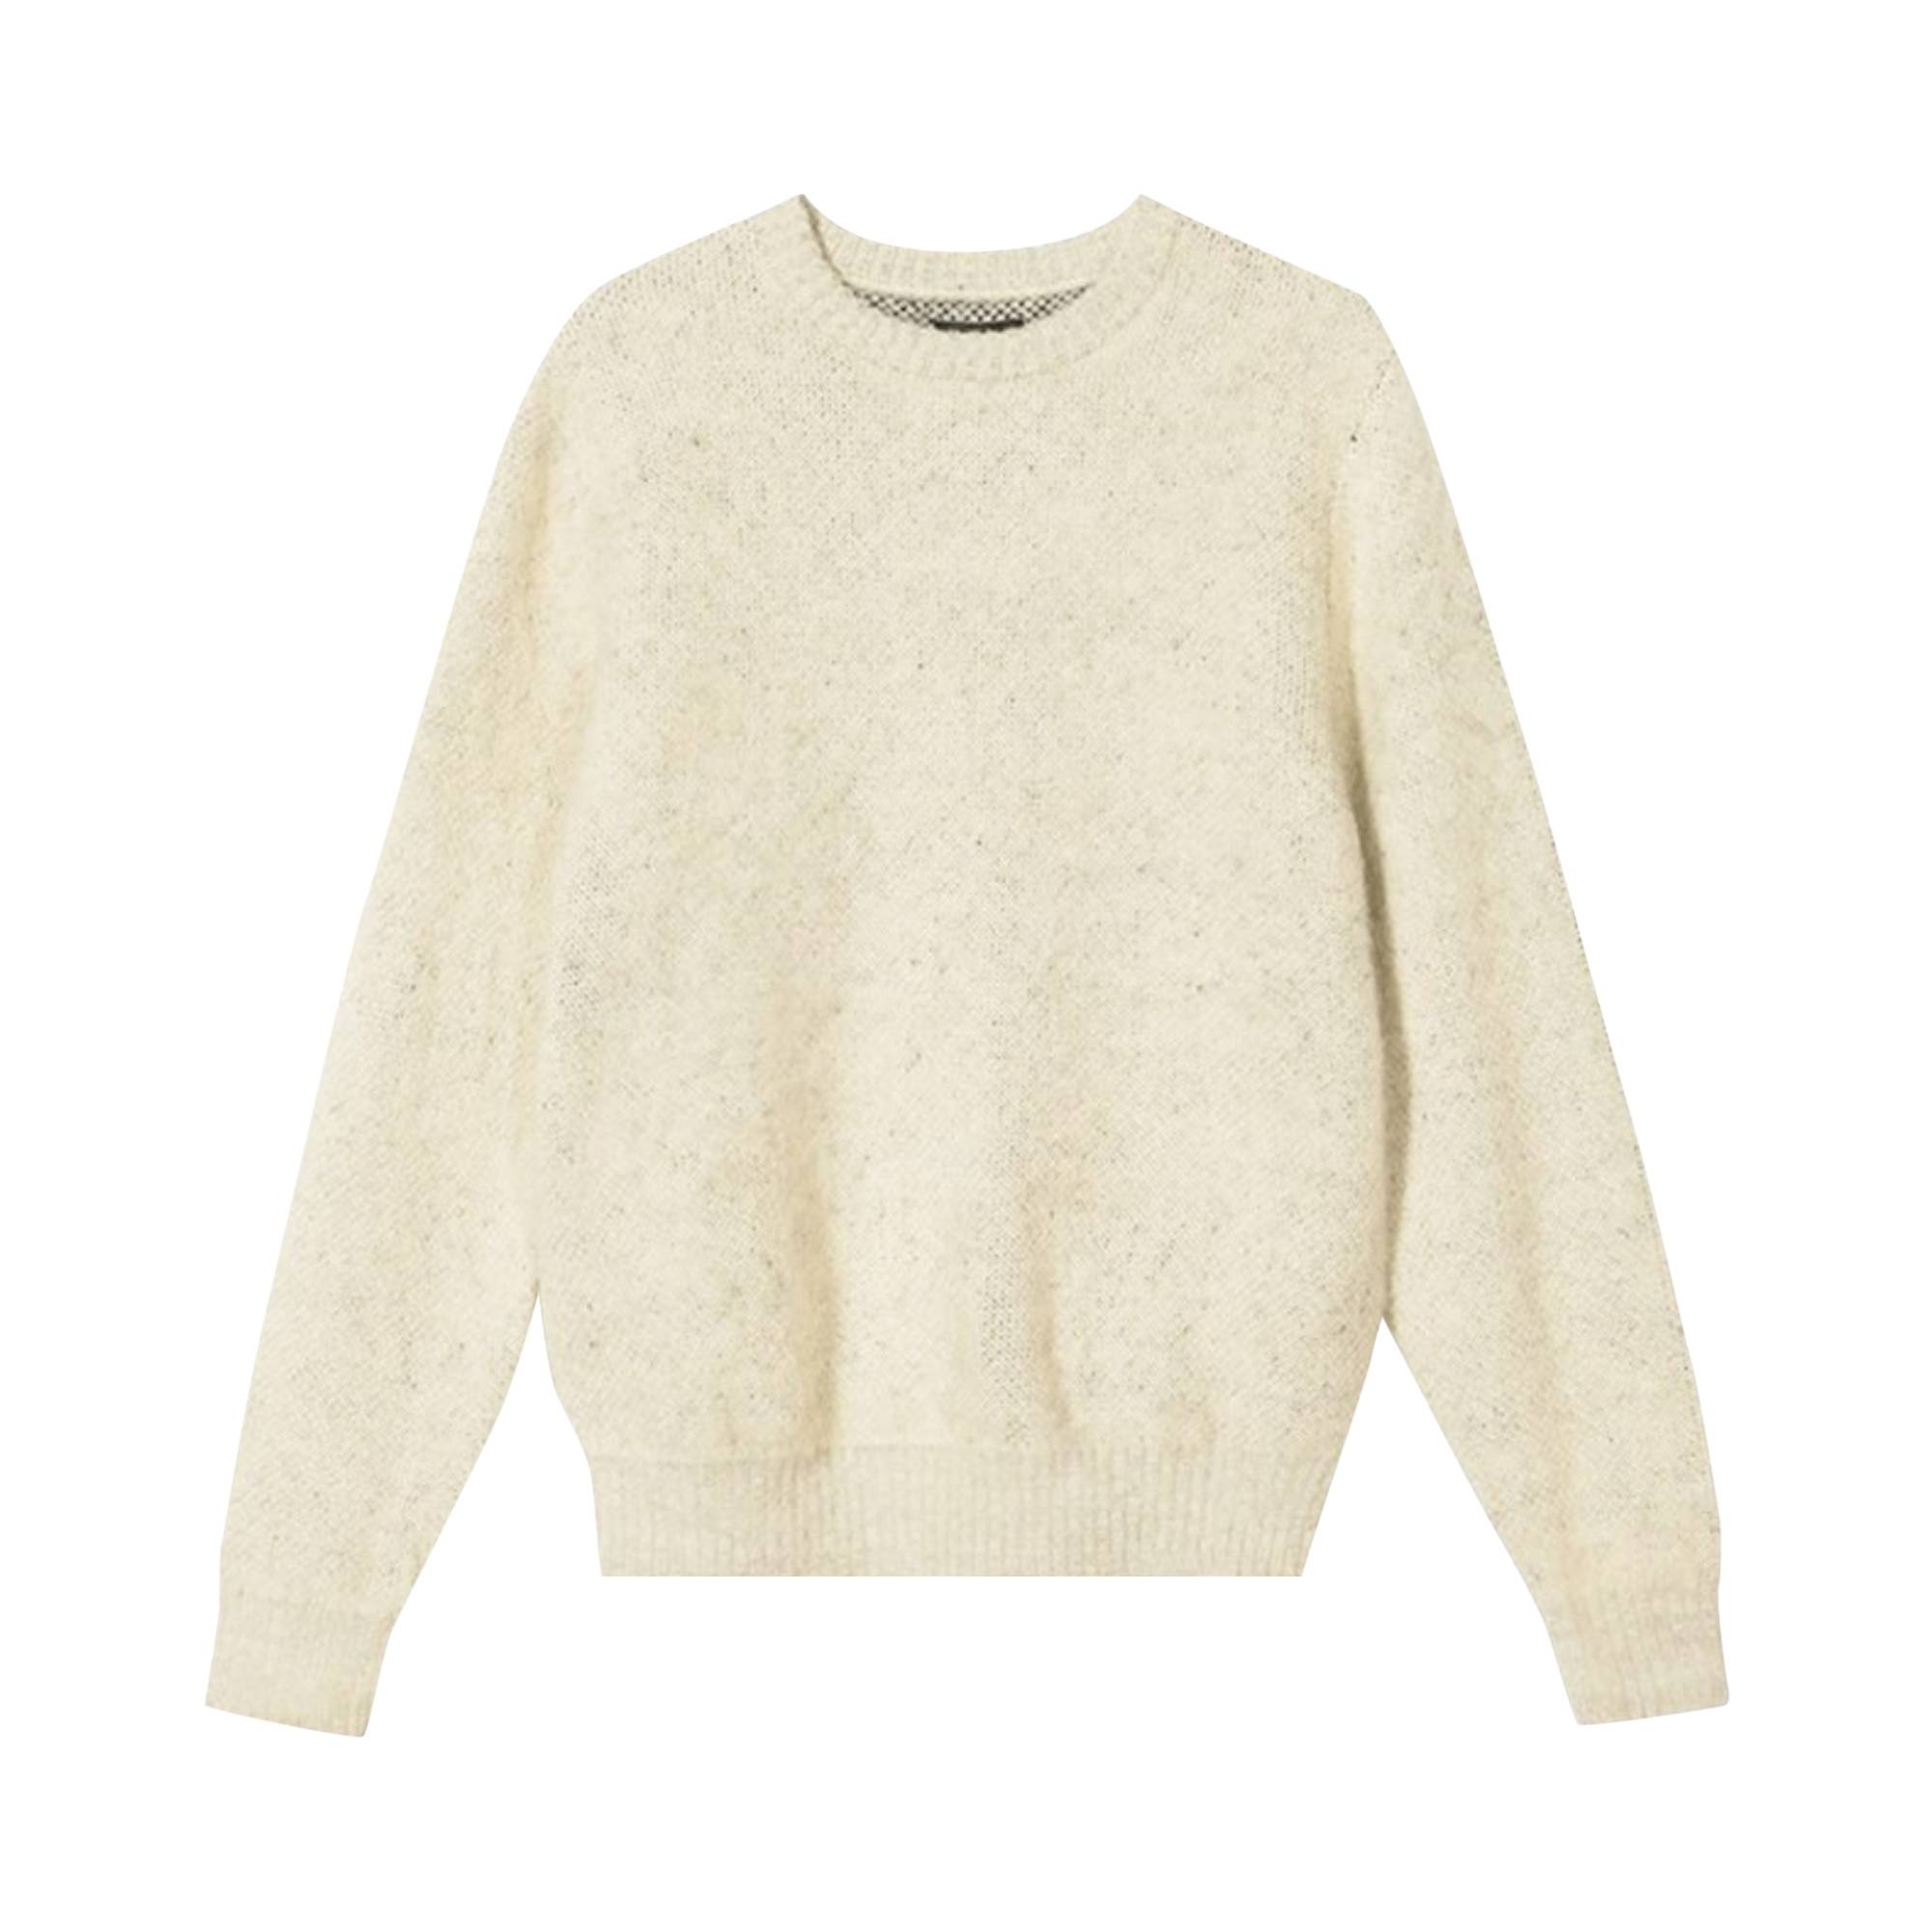 Stussy 8 Ball Heavy Brushed Mohair Sweater 'Cream' - 1